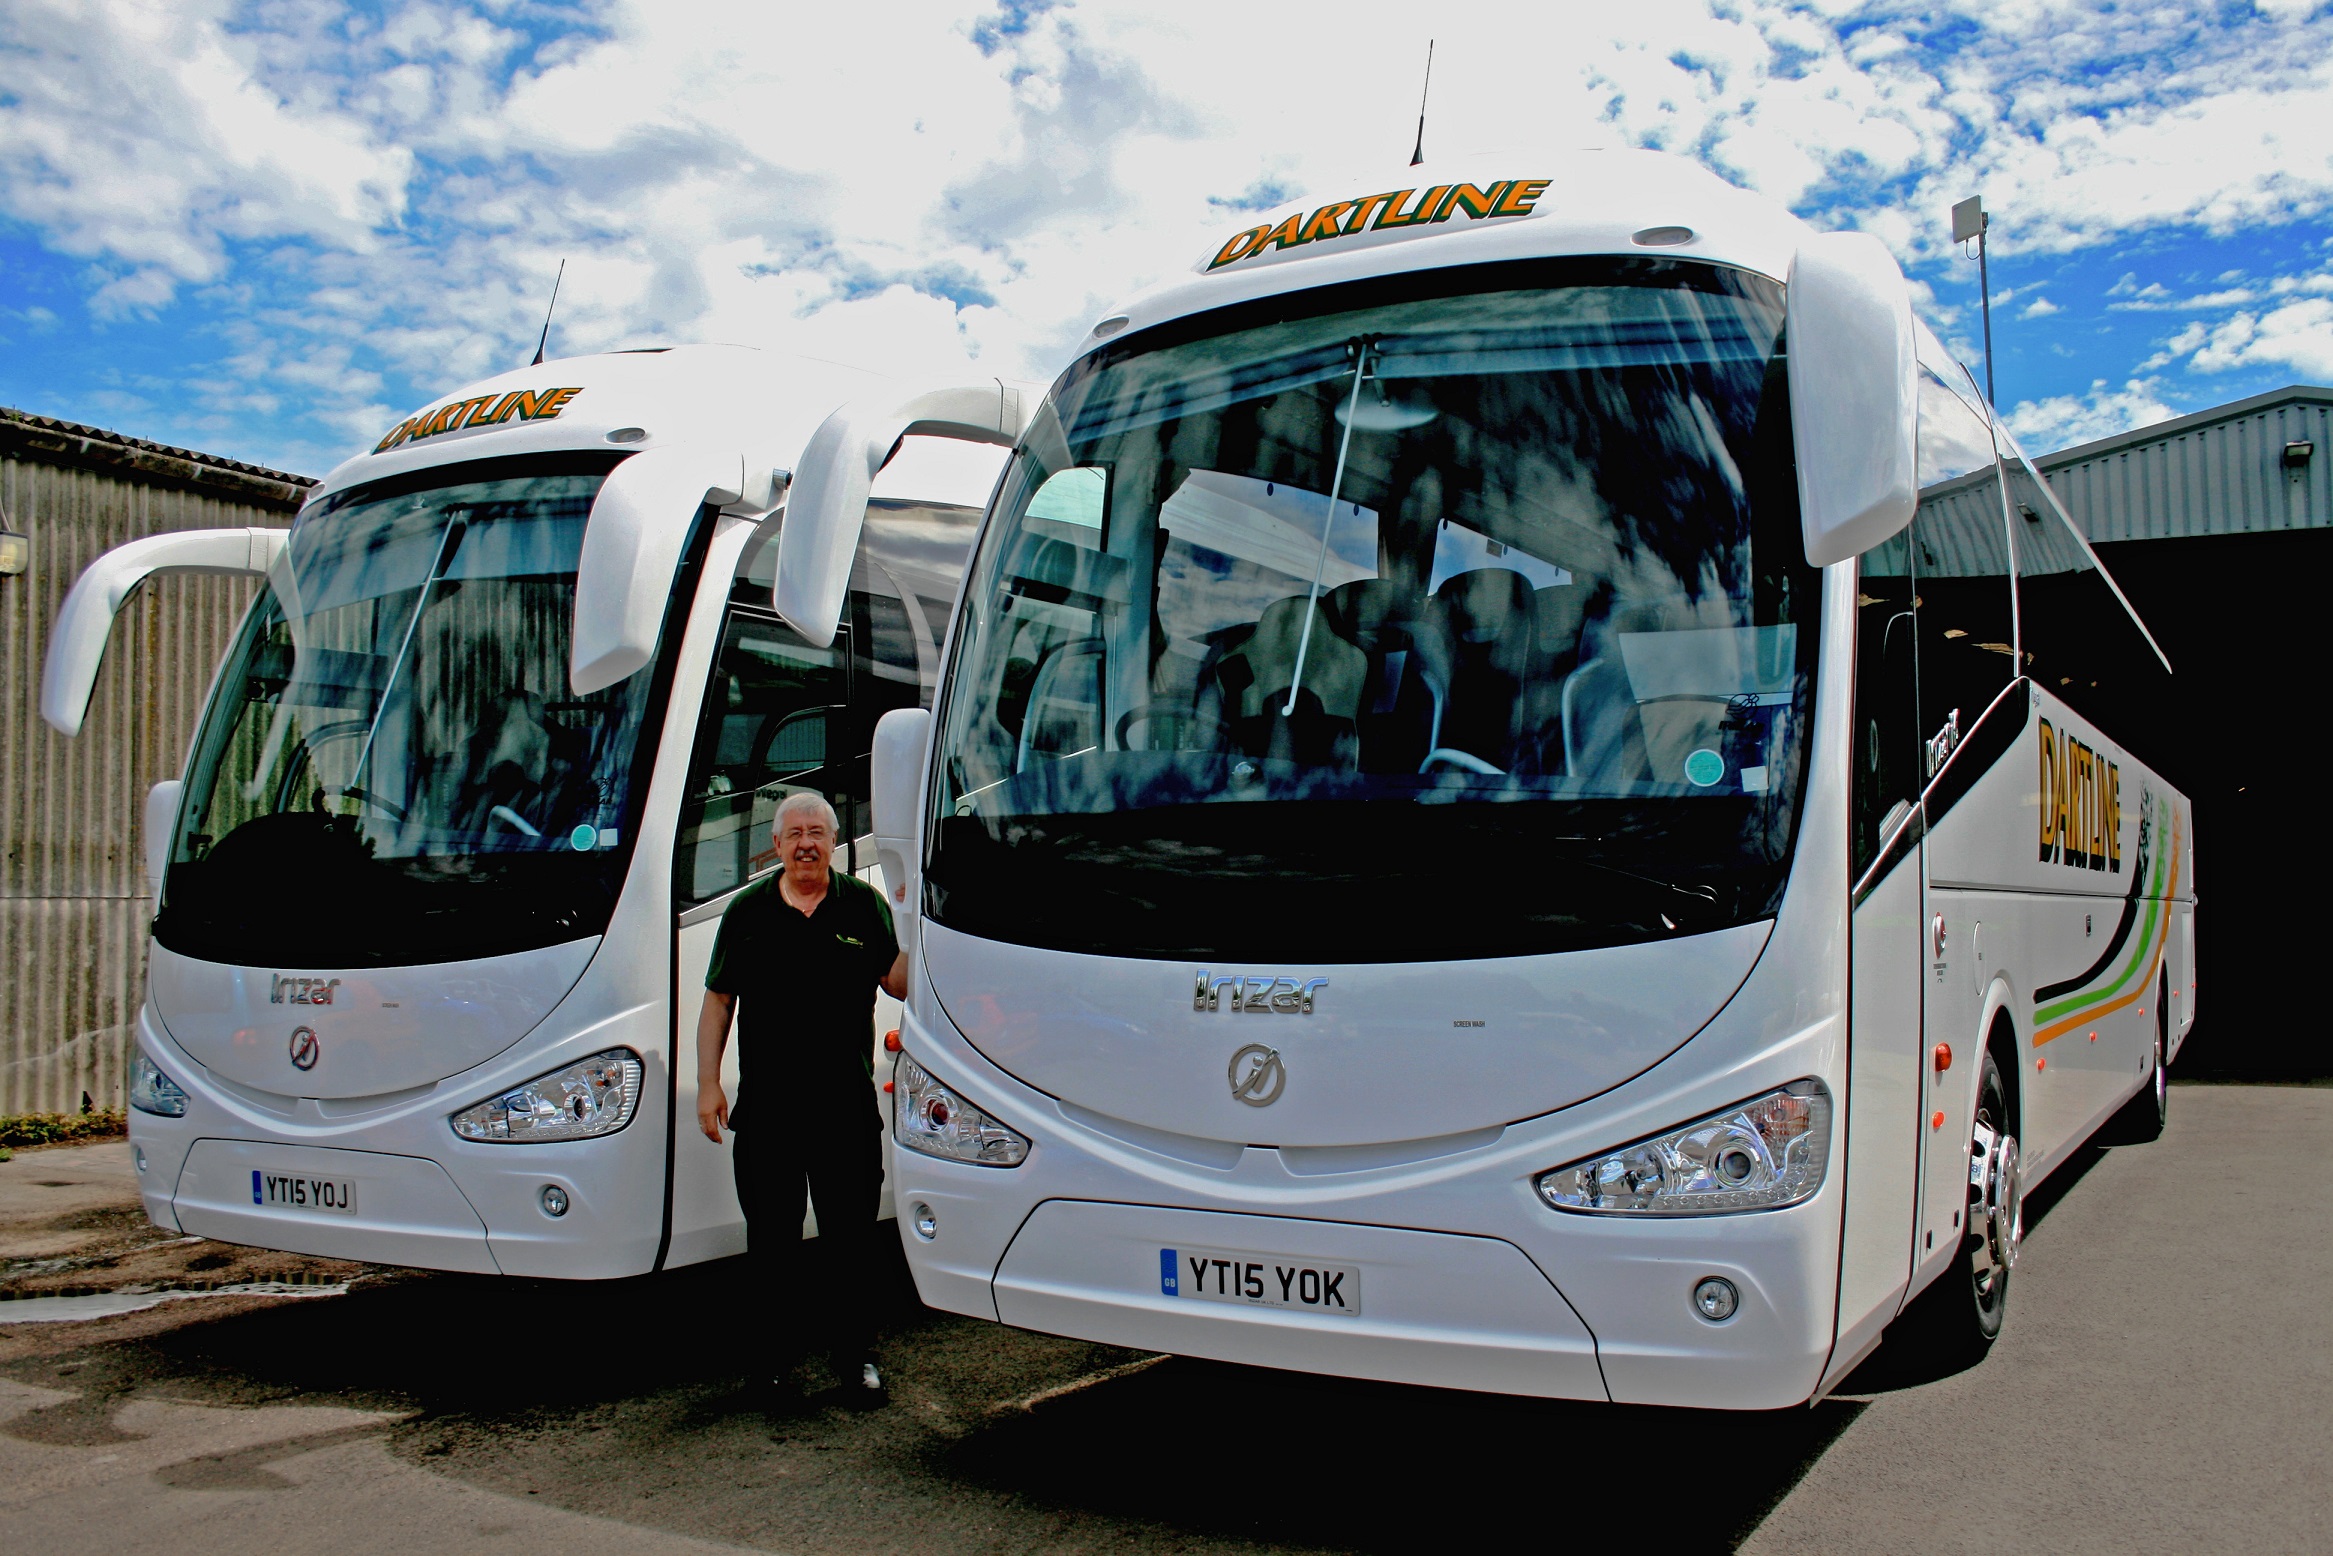 Dartline Coaches to be purchased by the Go-Ahead Group